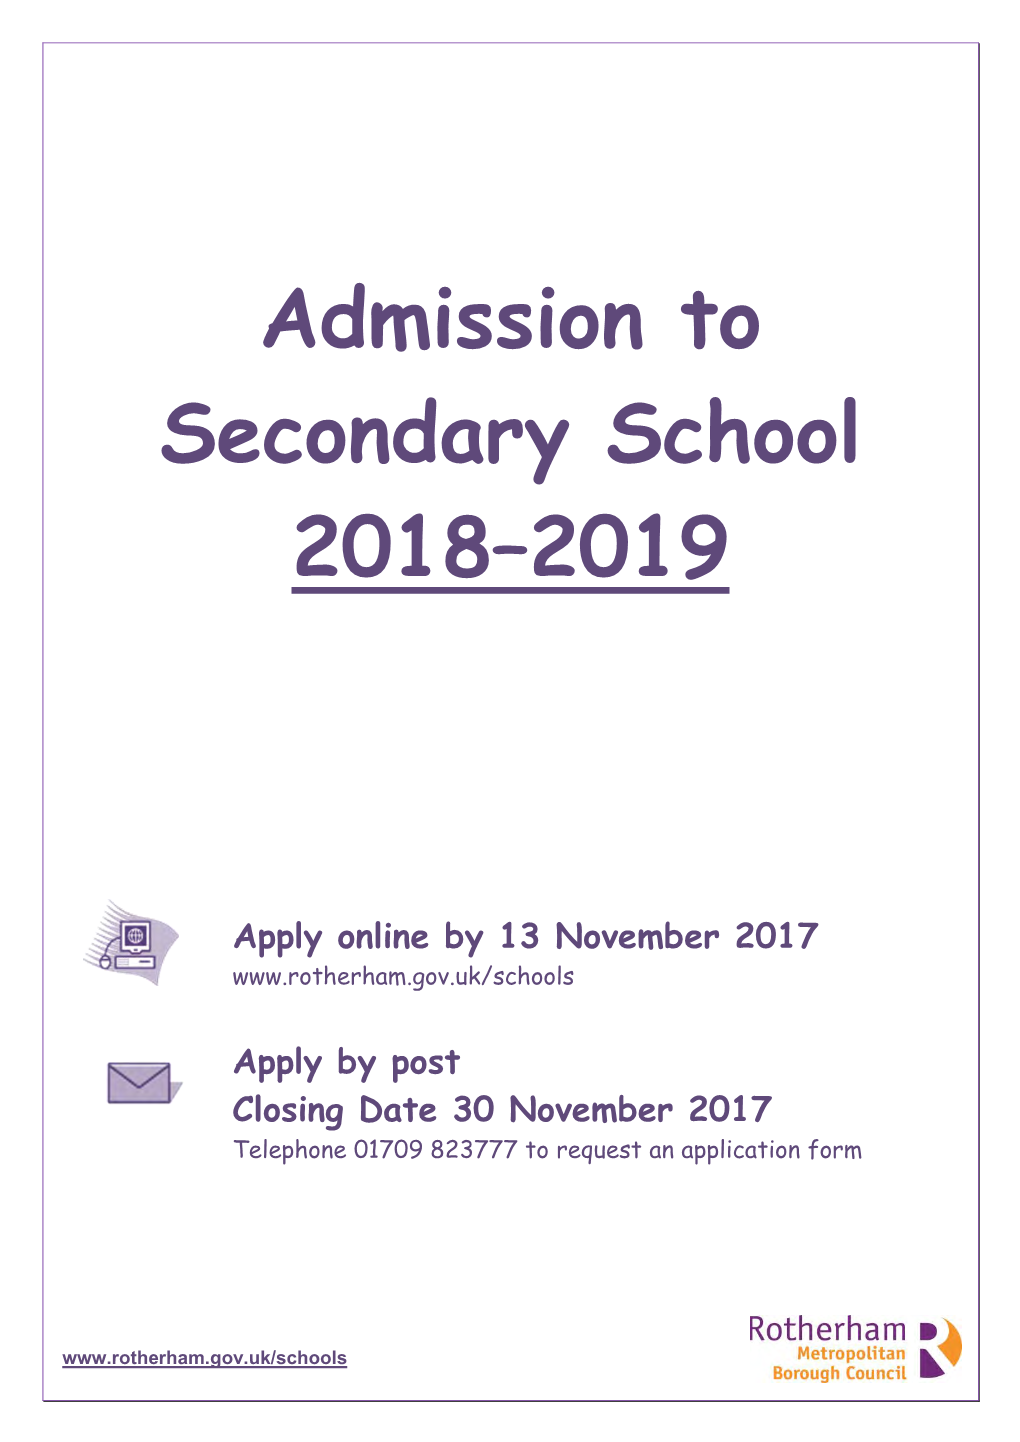 Admission to Secondary School Booklet 2018/19